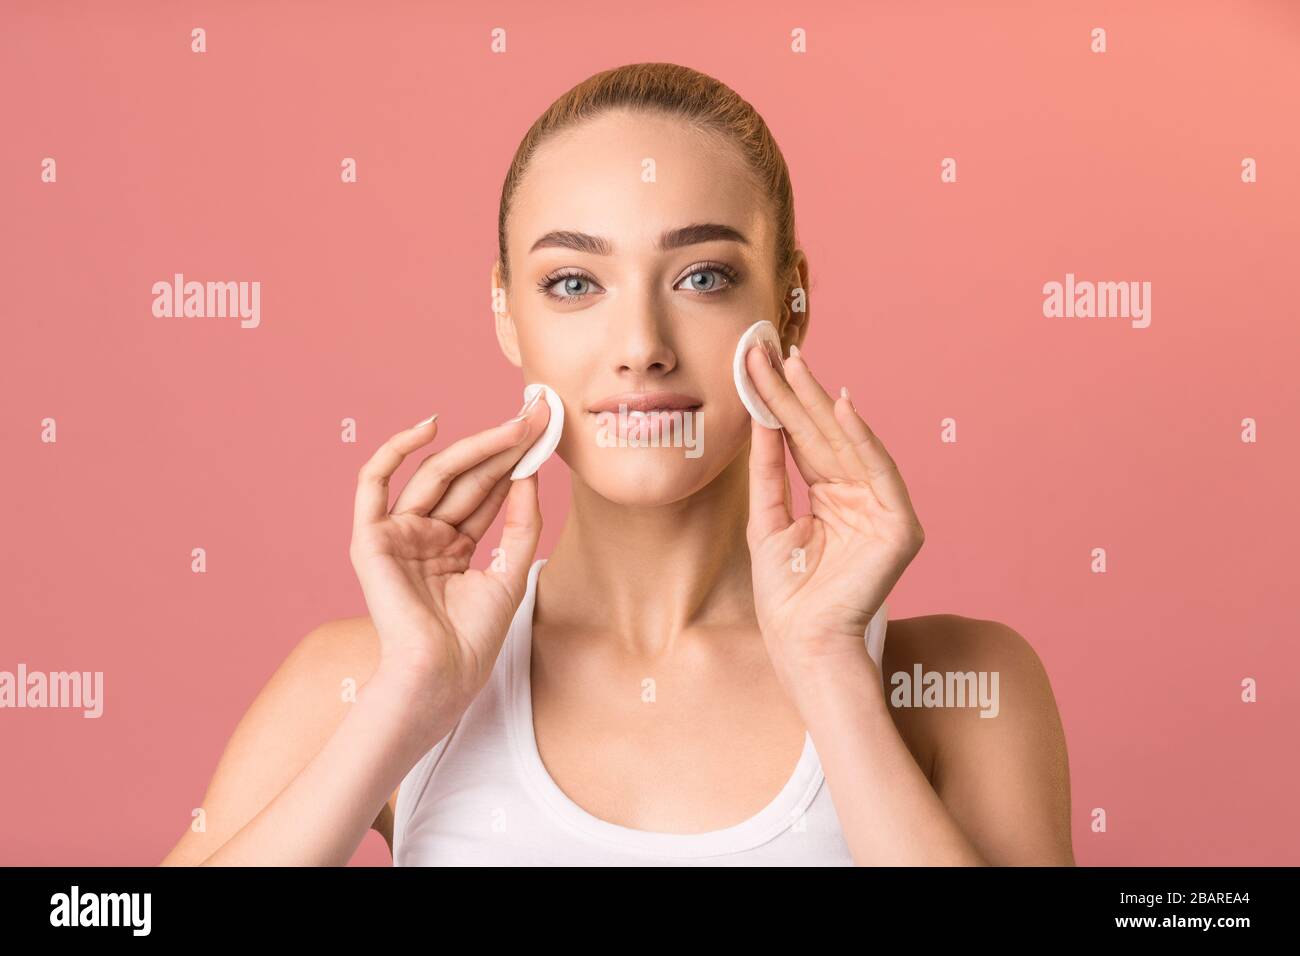 Girl using cotton pads looking at camera on pink background Stock Photo